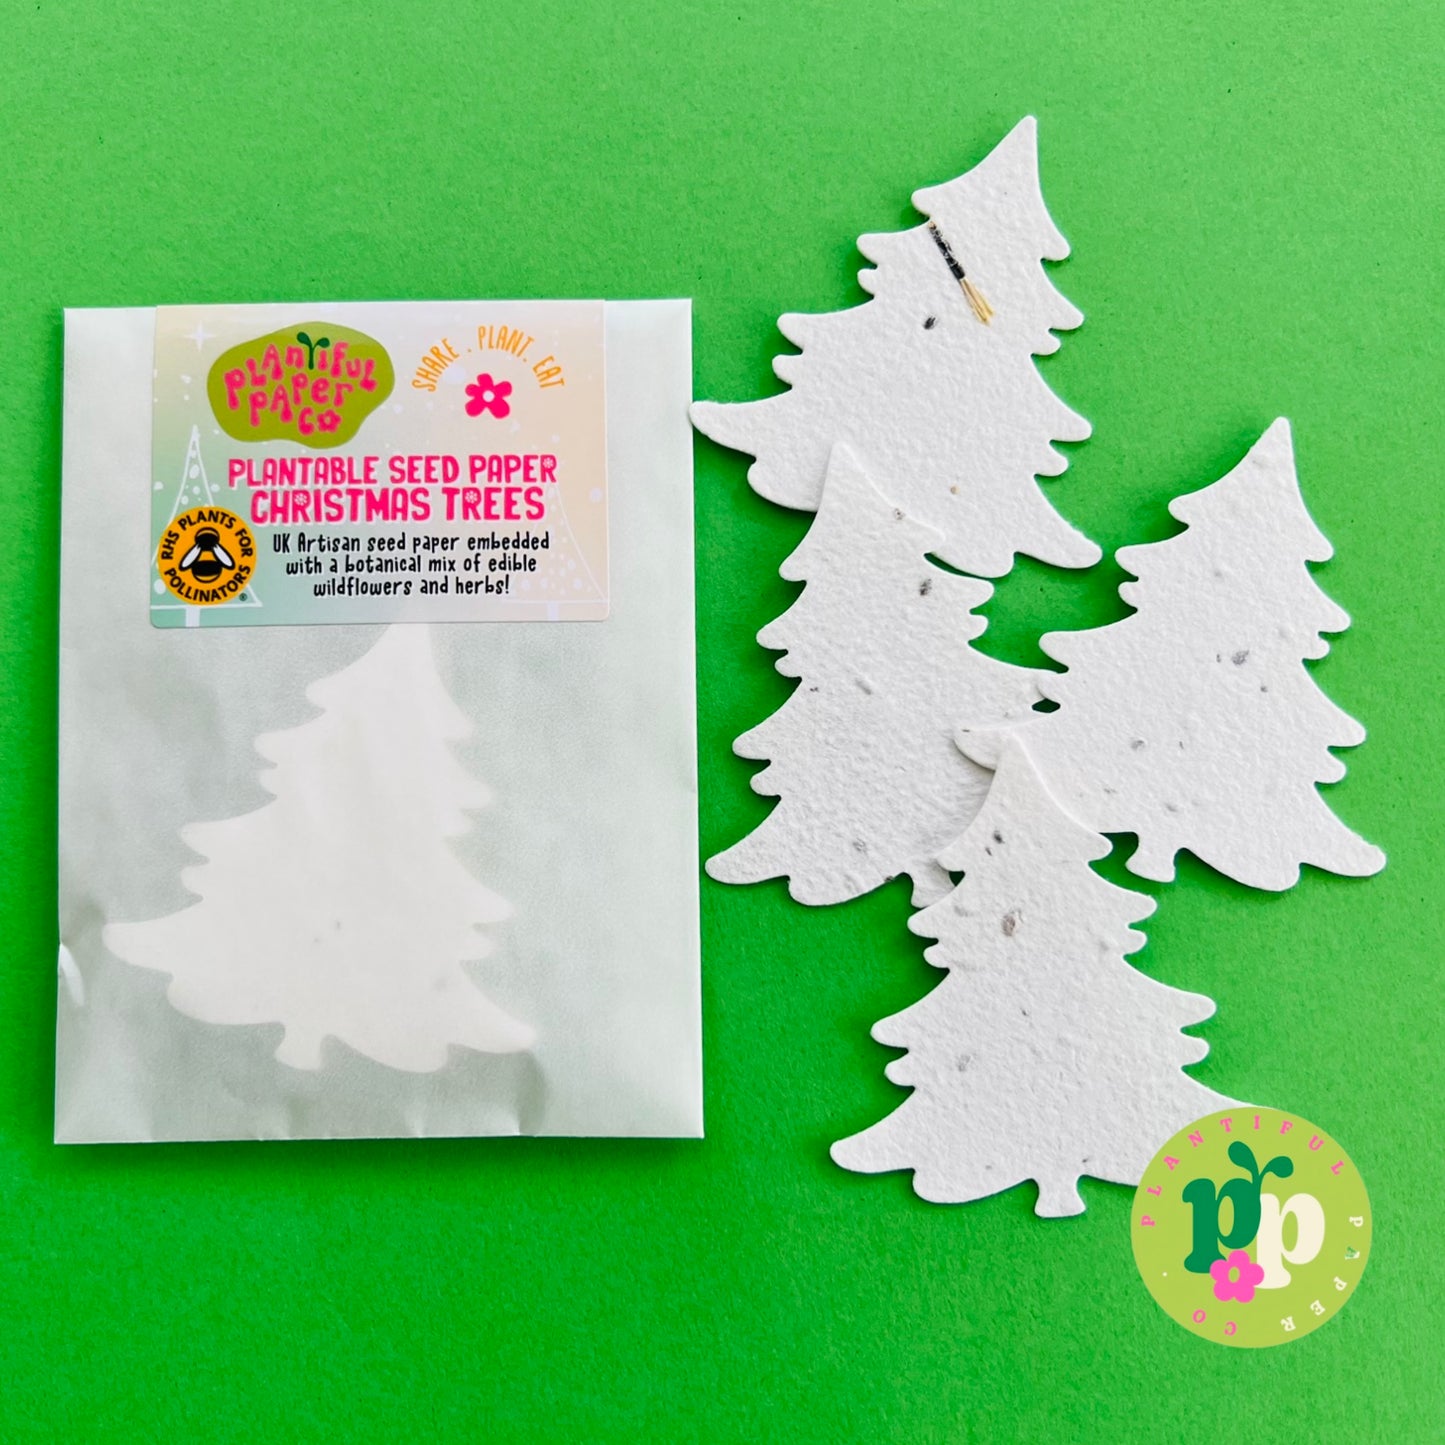 Plantable Seed Paper Christmas Trees